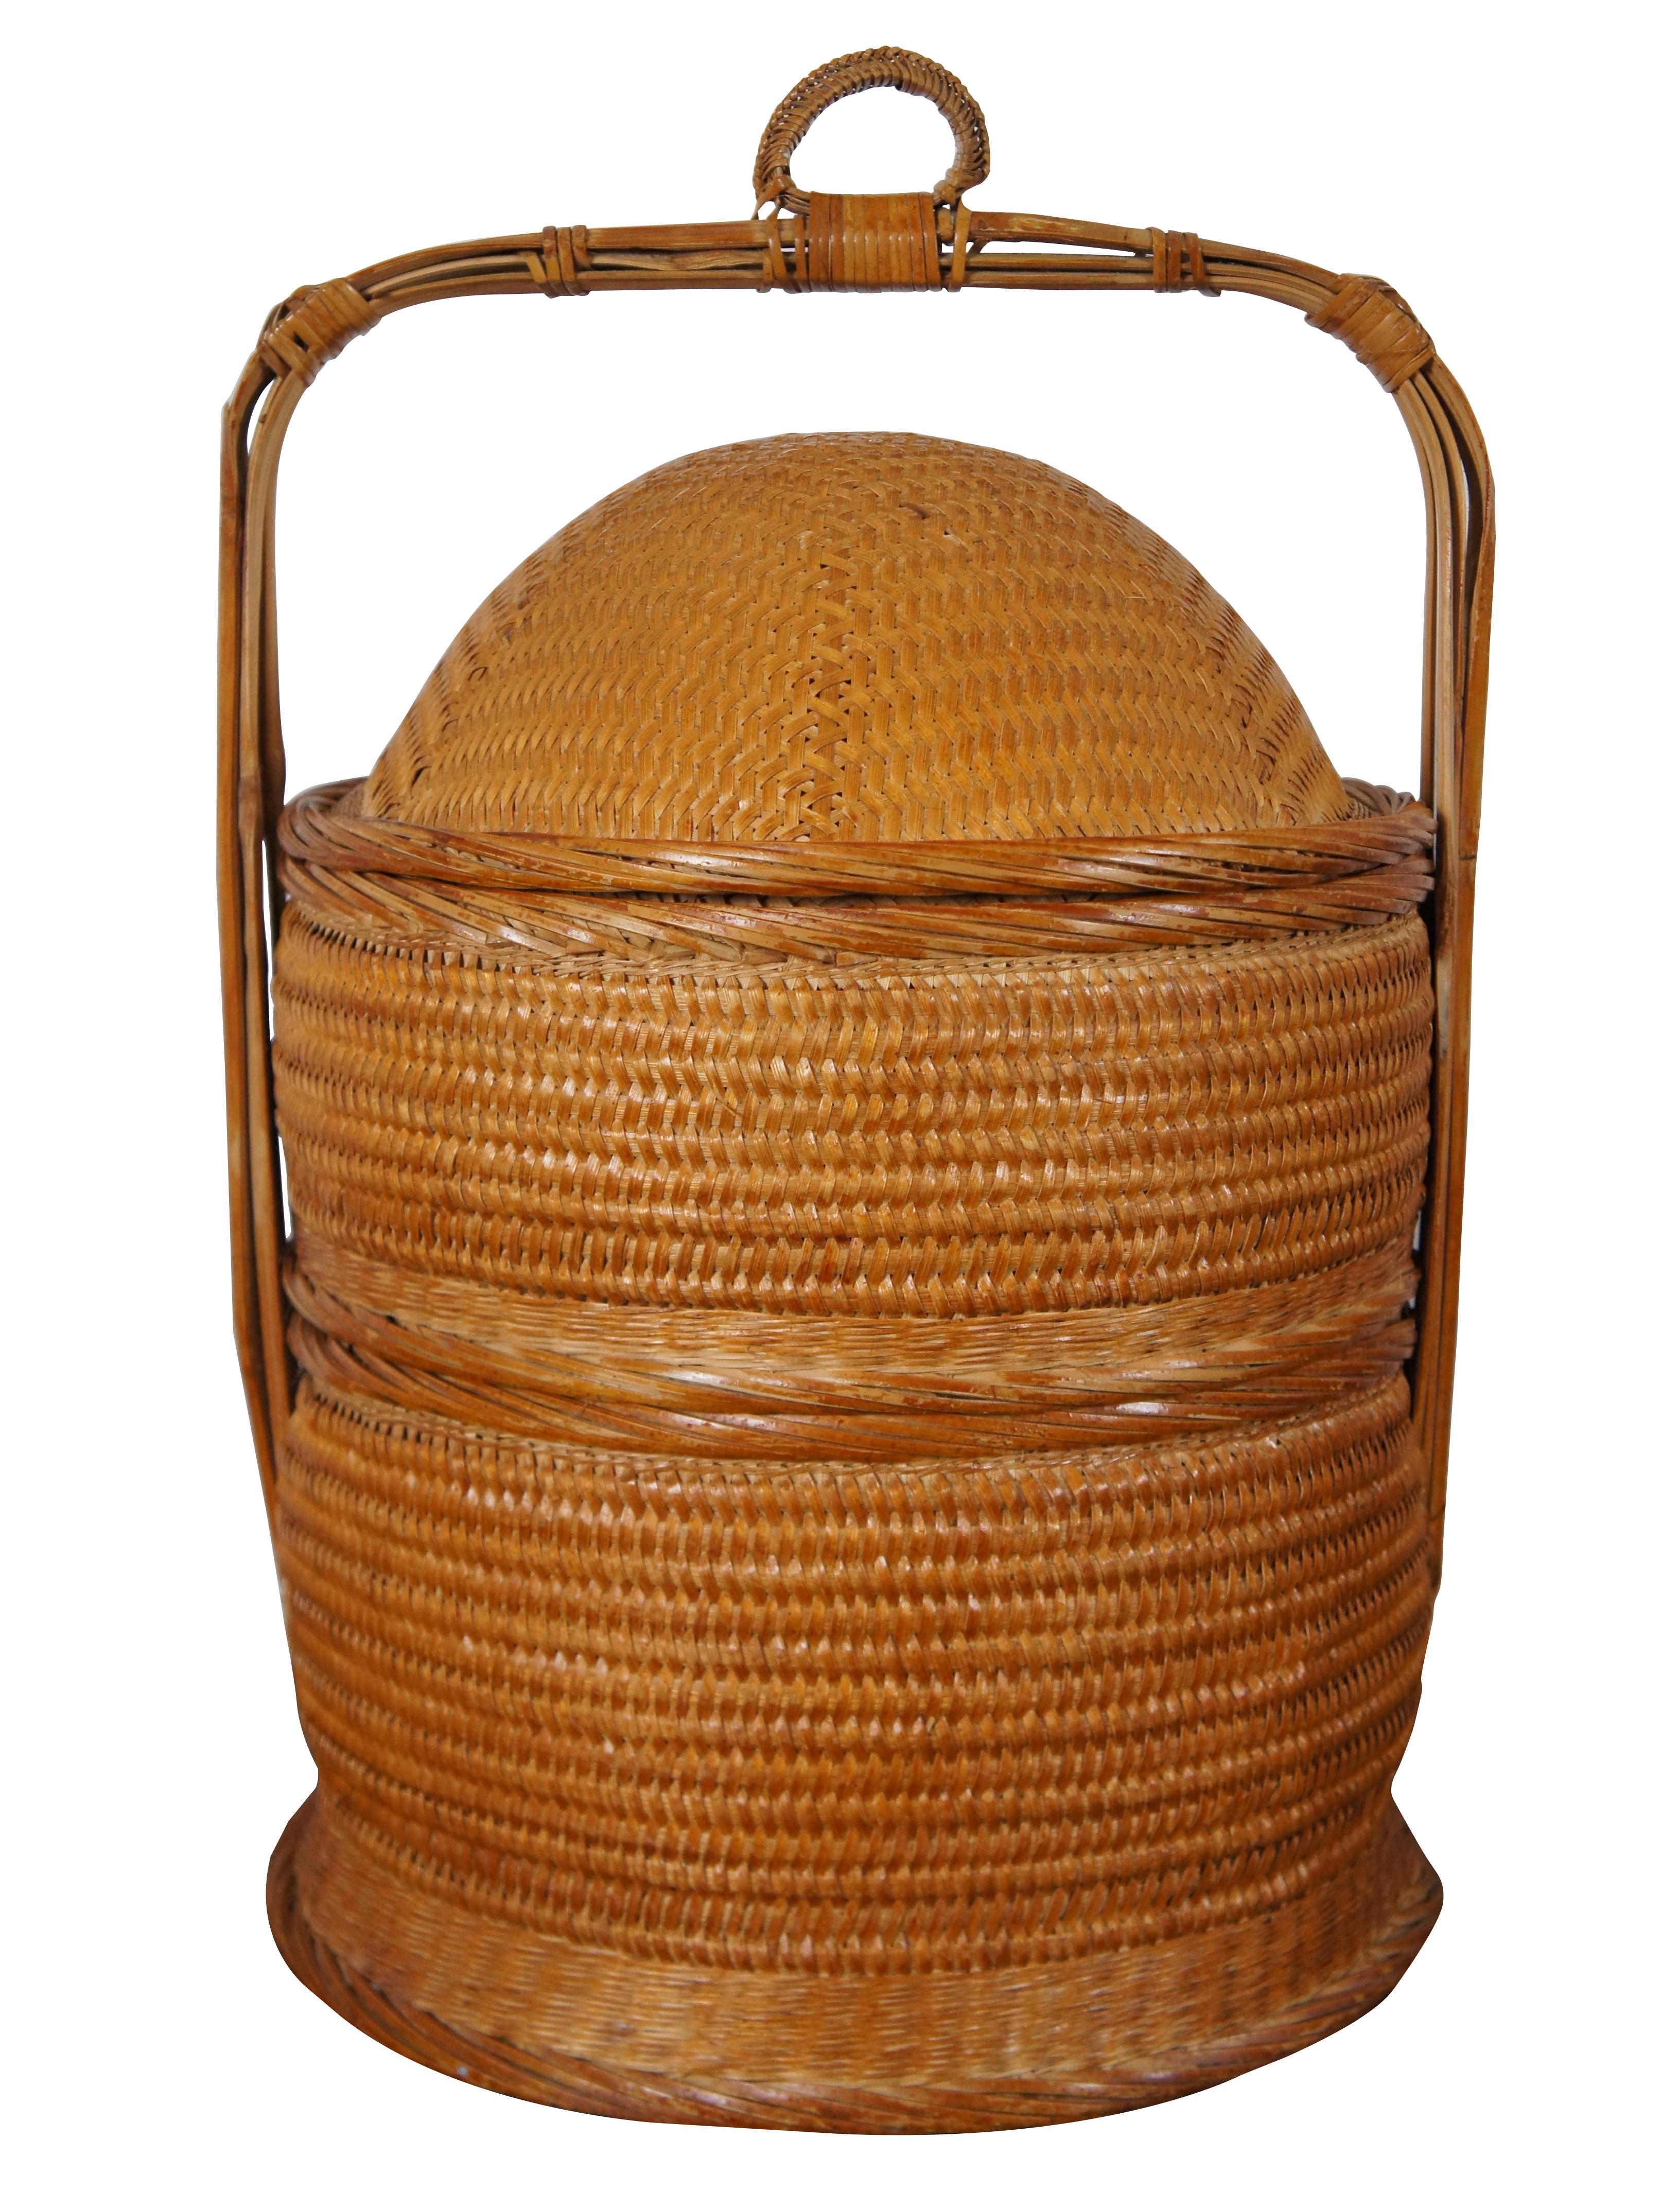 Pair of vintage 20th century bentwood bamboo / rattan / wicker Chinese wedding baskets, both featuring round bodies, domed lids and squared off, fixed handles at the top. The smaller is single tiered and the larger is two tiered.

Measures: taller